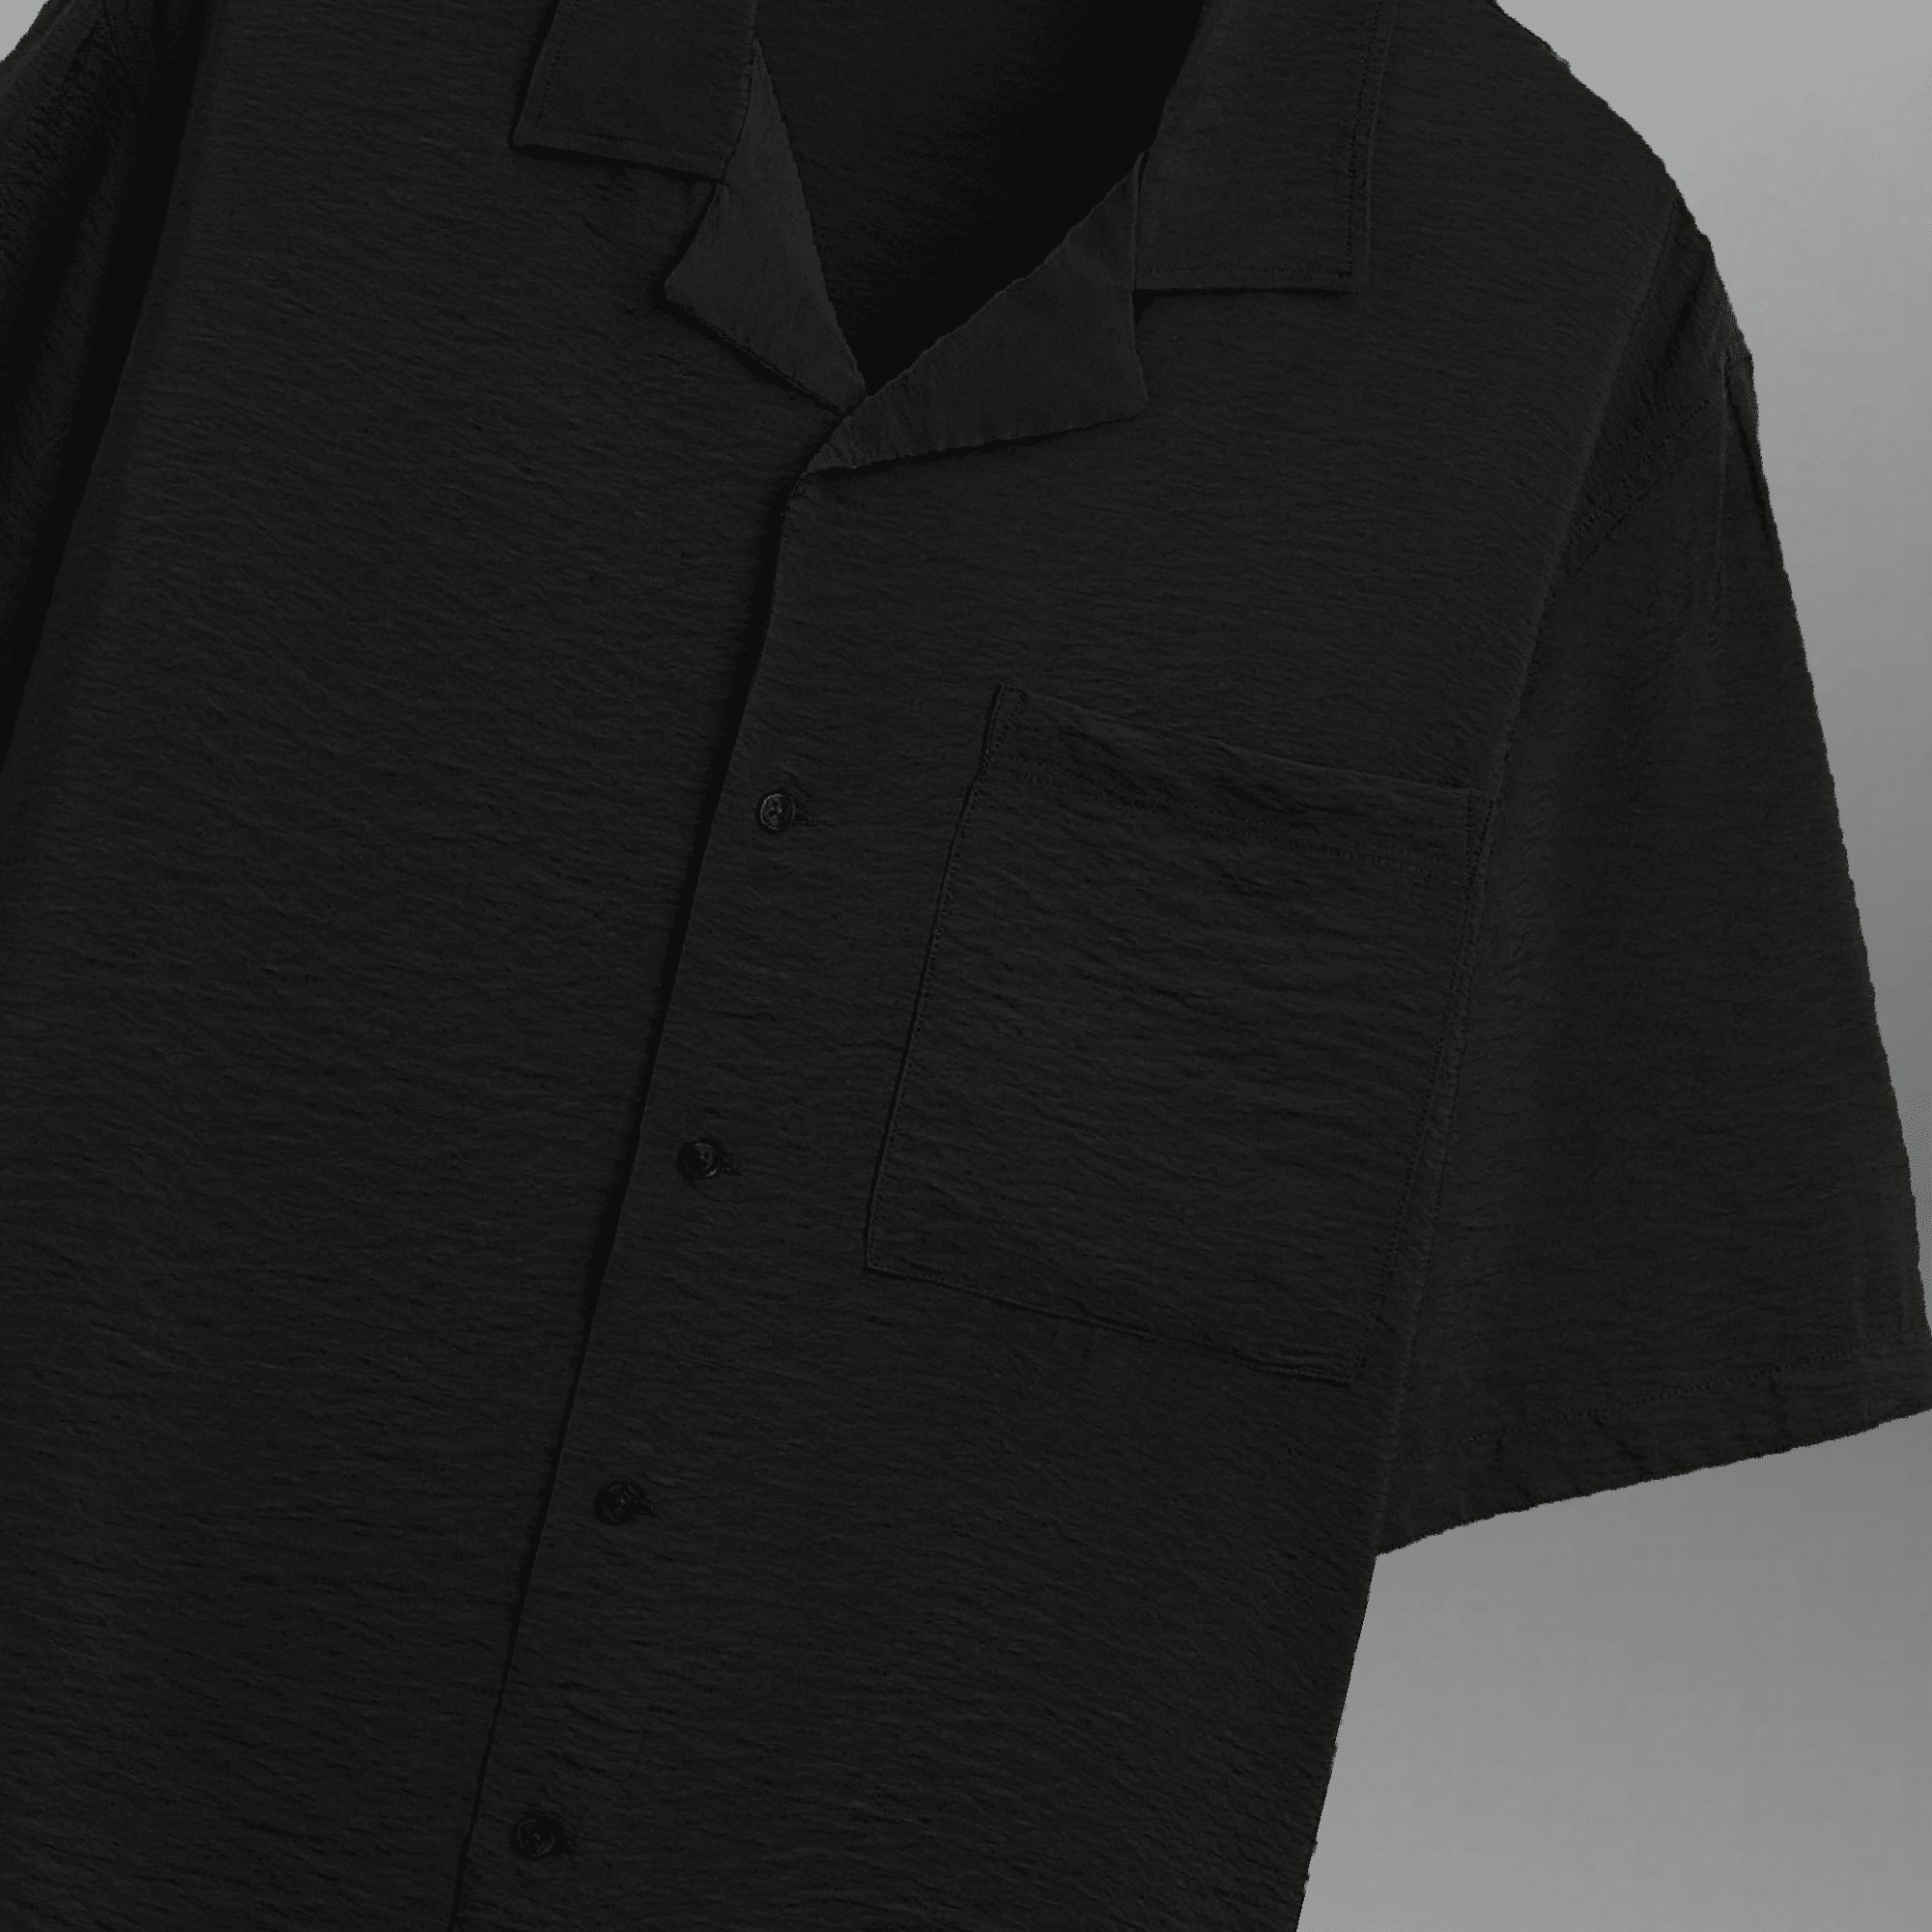 Men's Black Textured Oversized Camp Collar Shirt with a Pocket-RMS043